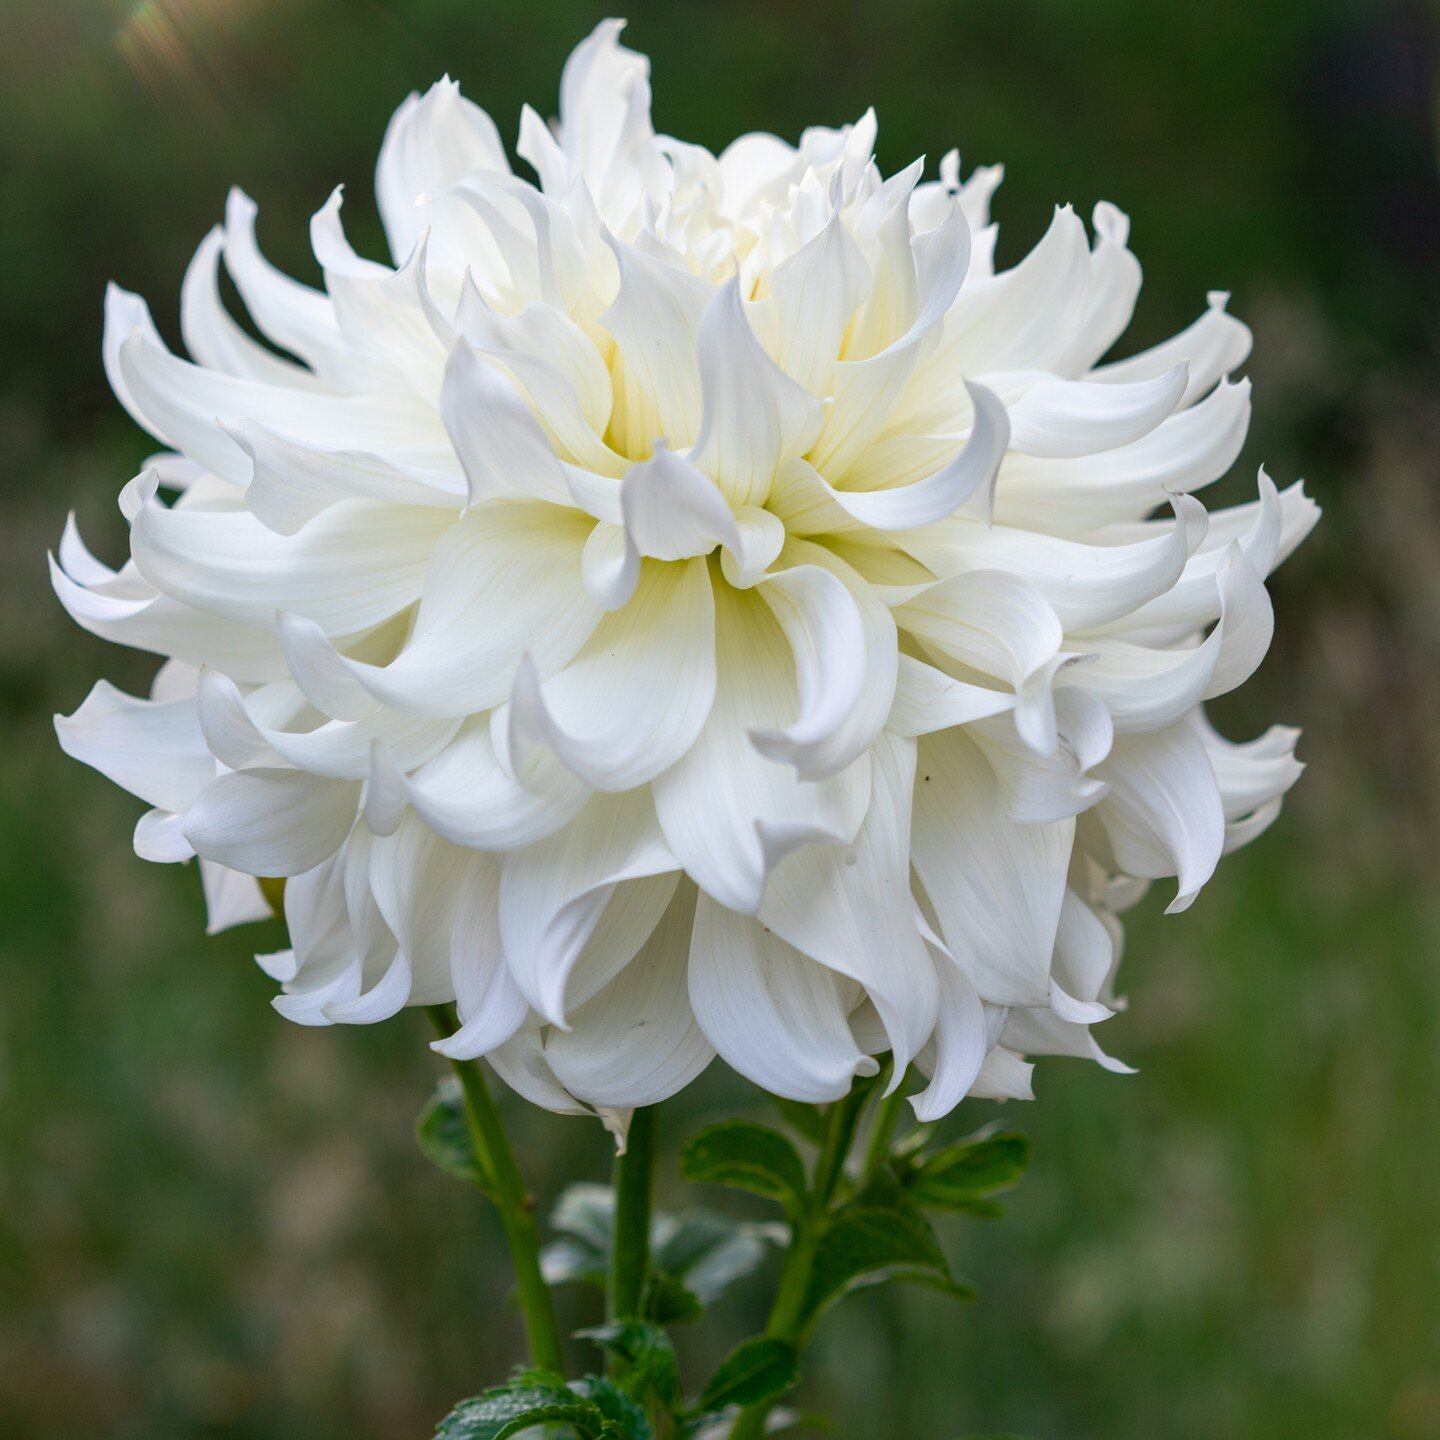 I love white Dahlias &amp; here is a new fave!